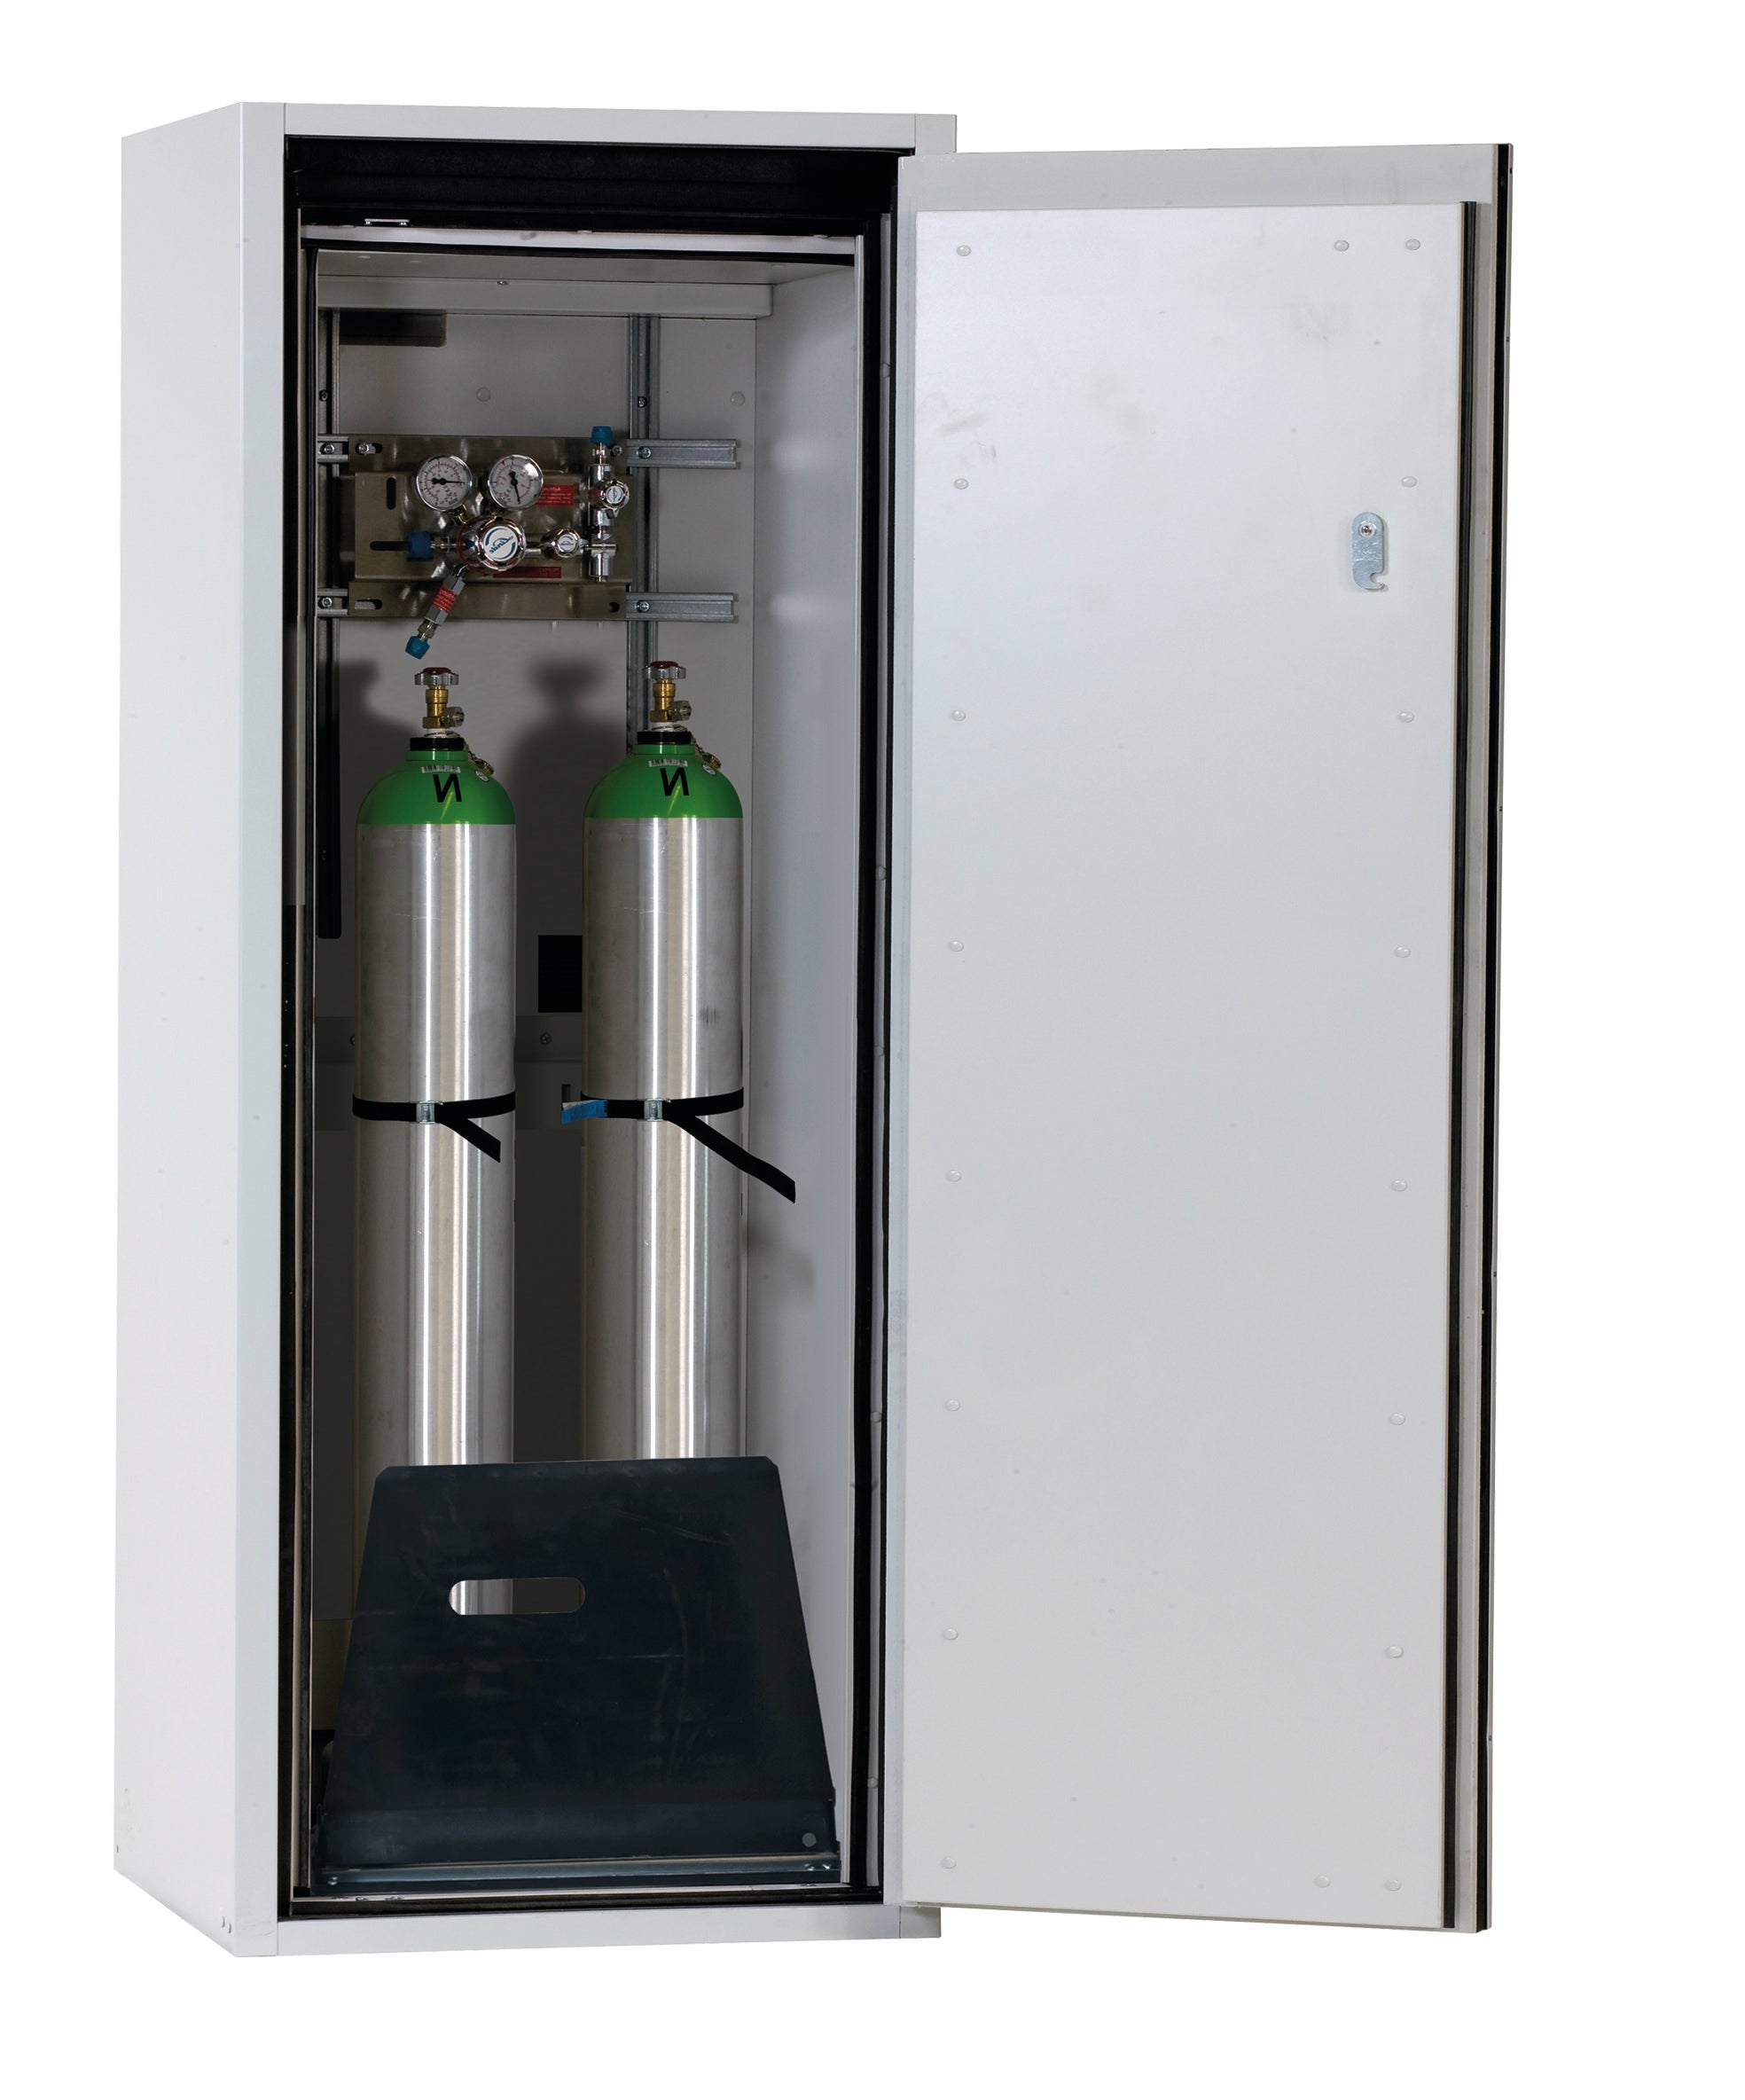 Type 90 compressed gas bottle cabinet G-ULTIMATE-90 model G90.145.060.R in light gray RAL 7035 with standard interior fittings for 2x compressed gas bottles of 10 liters each